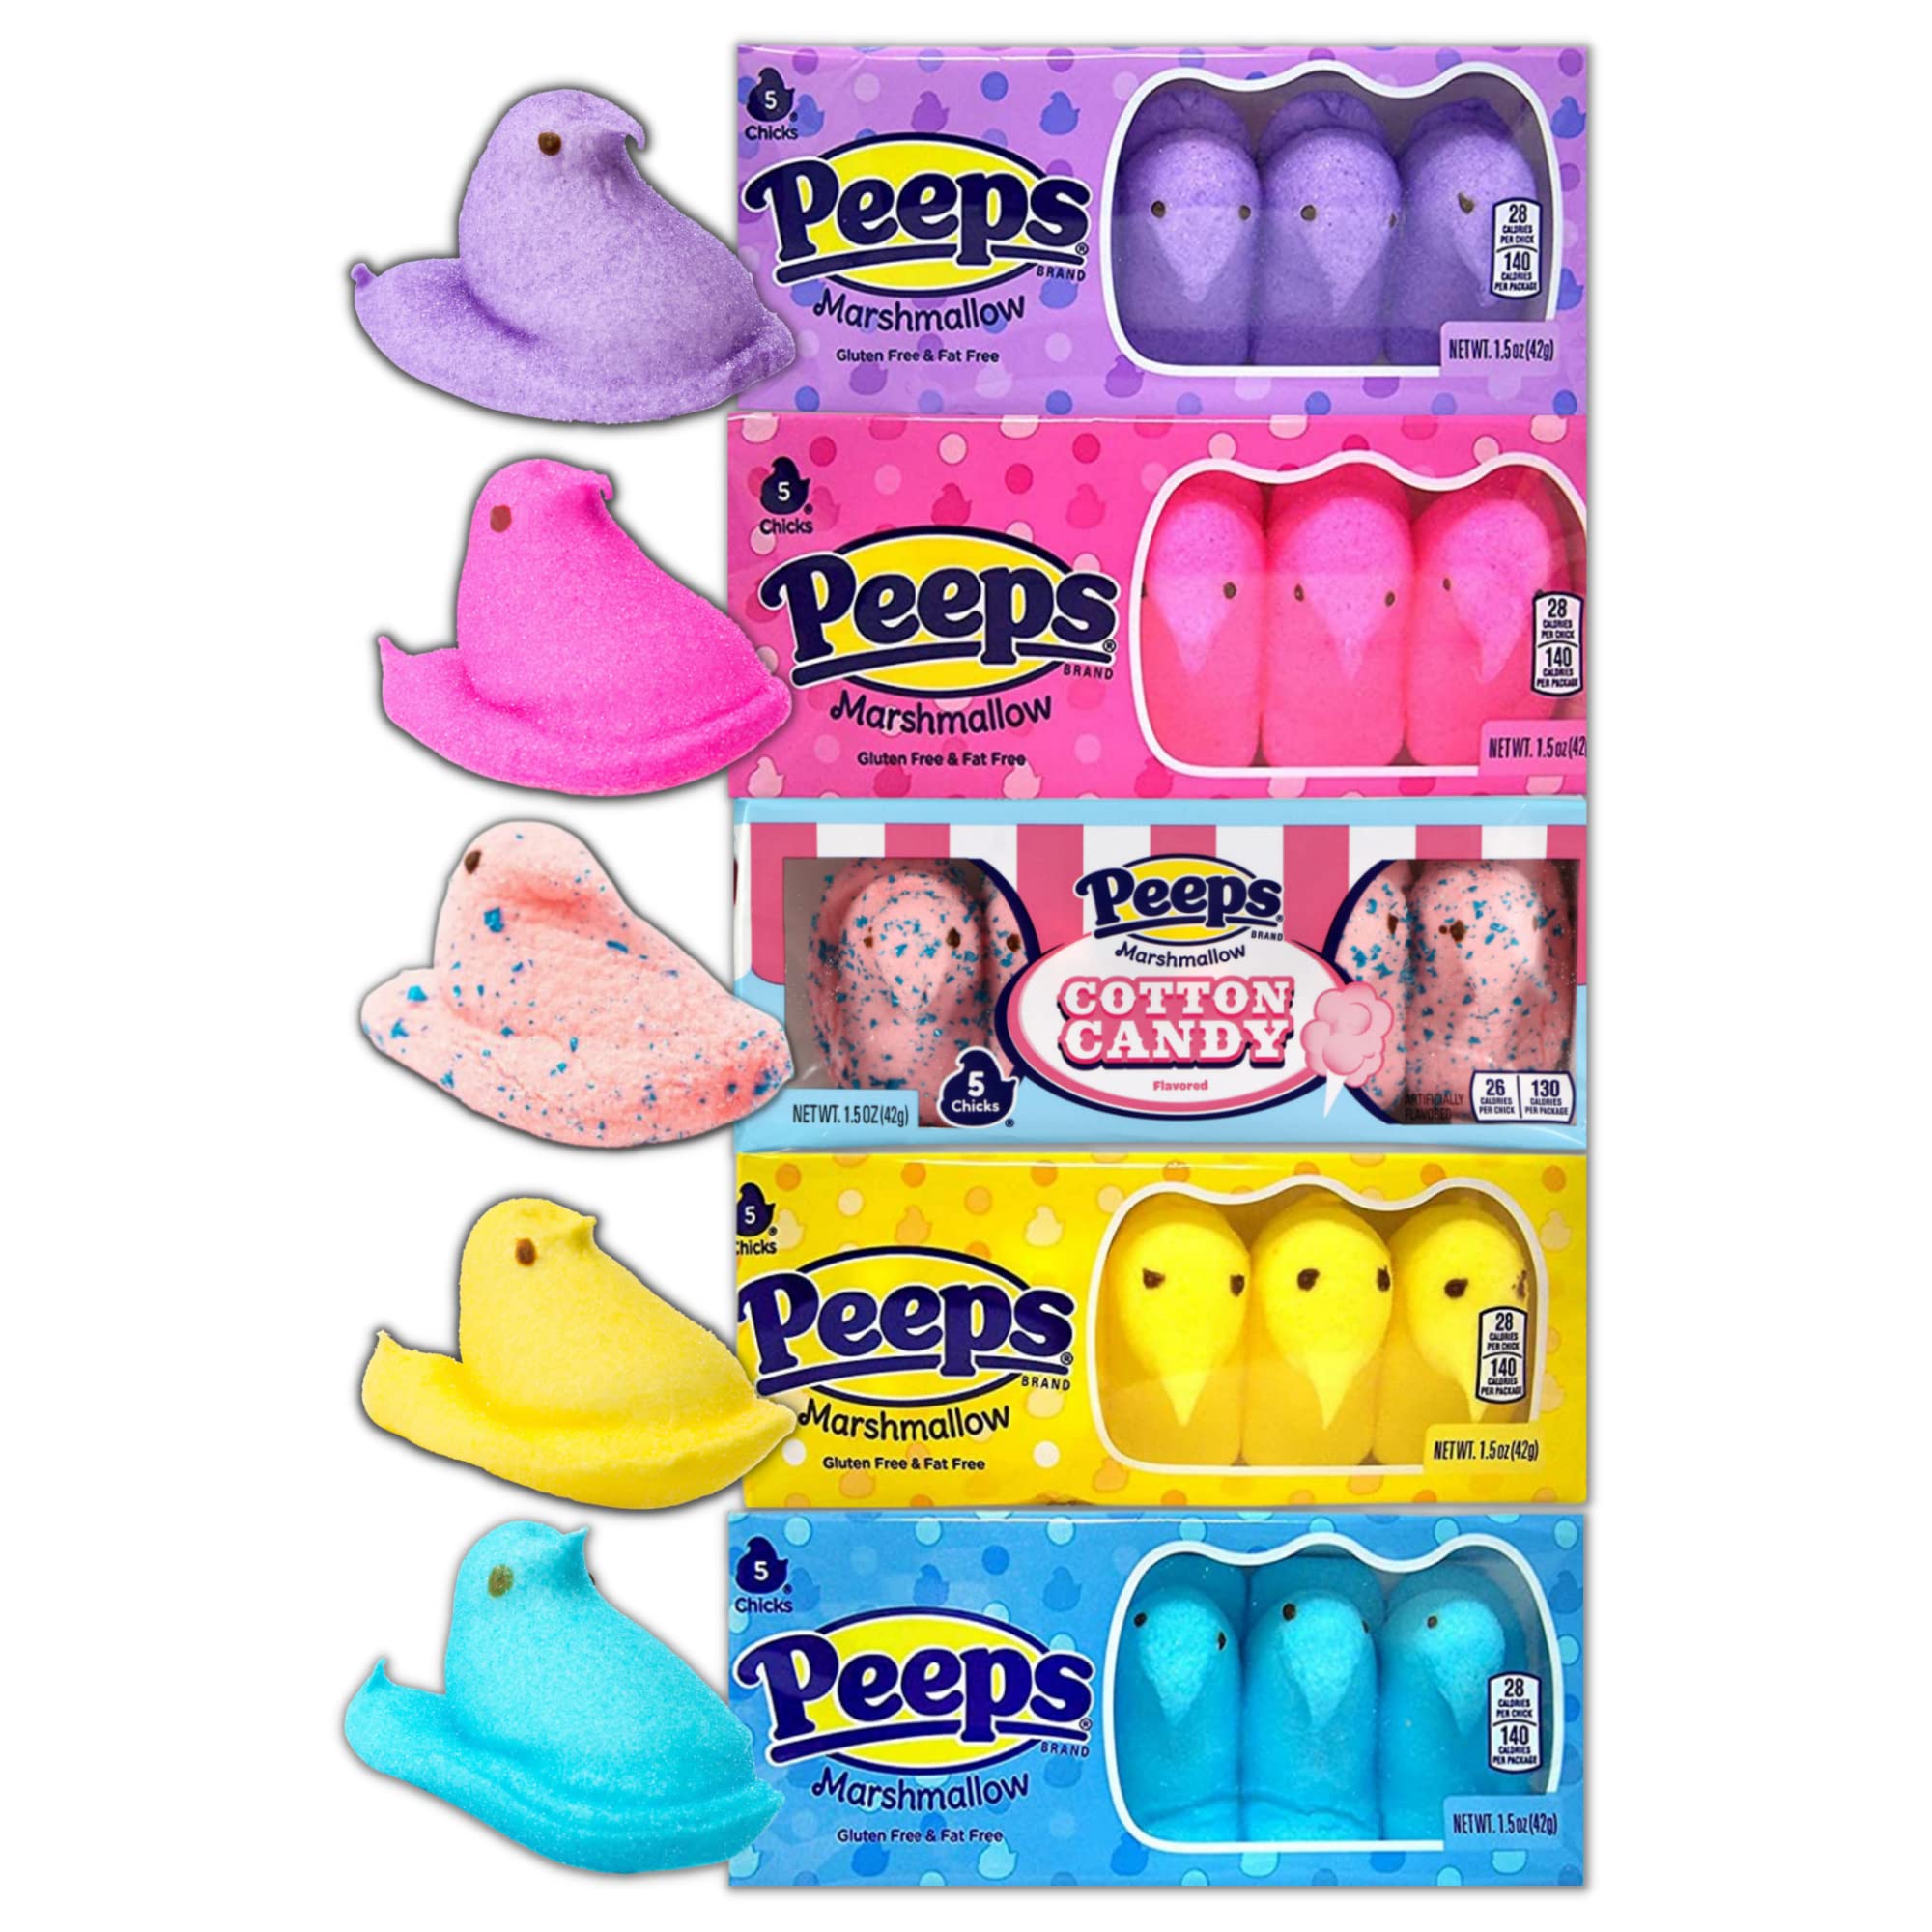 Peeps Marshmallow Easter Candy Variety 5 Pack, Sugar Coated Fluffy Marshmallows in Assorted Colors, Cute Dessert Toppers, 5 Count, Pack of 5